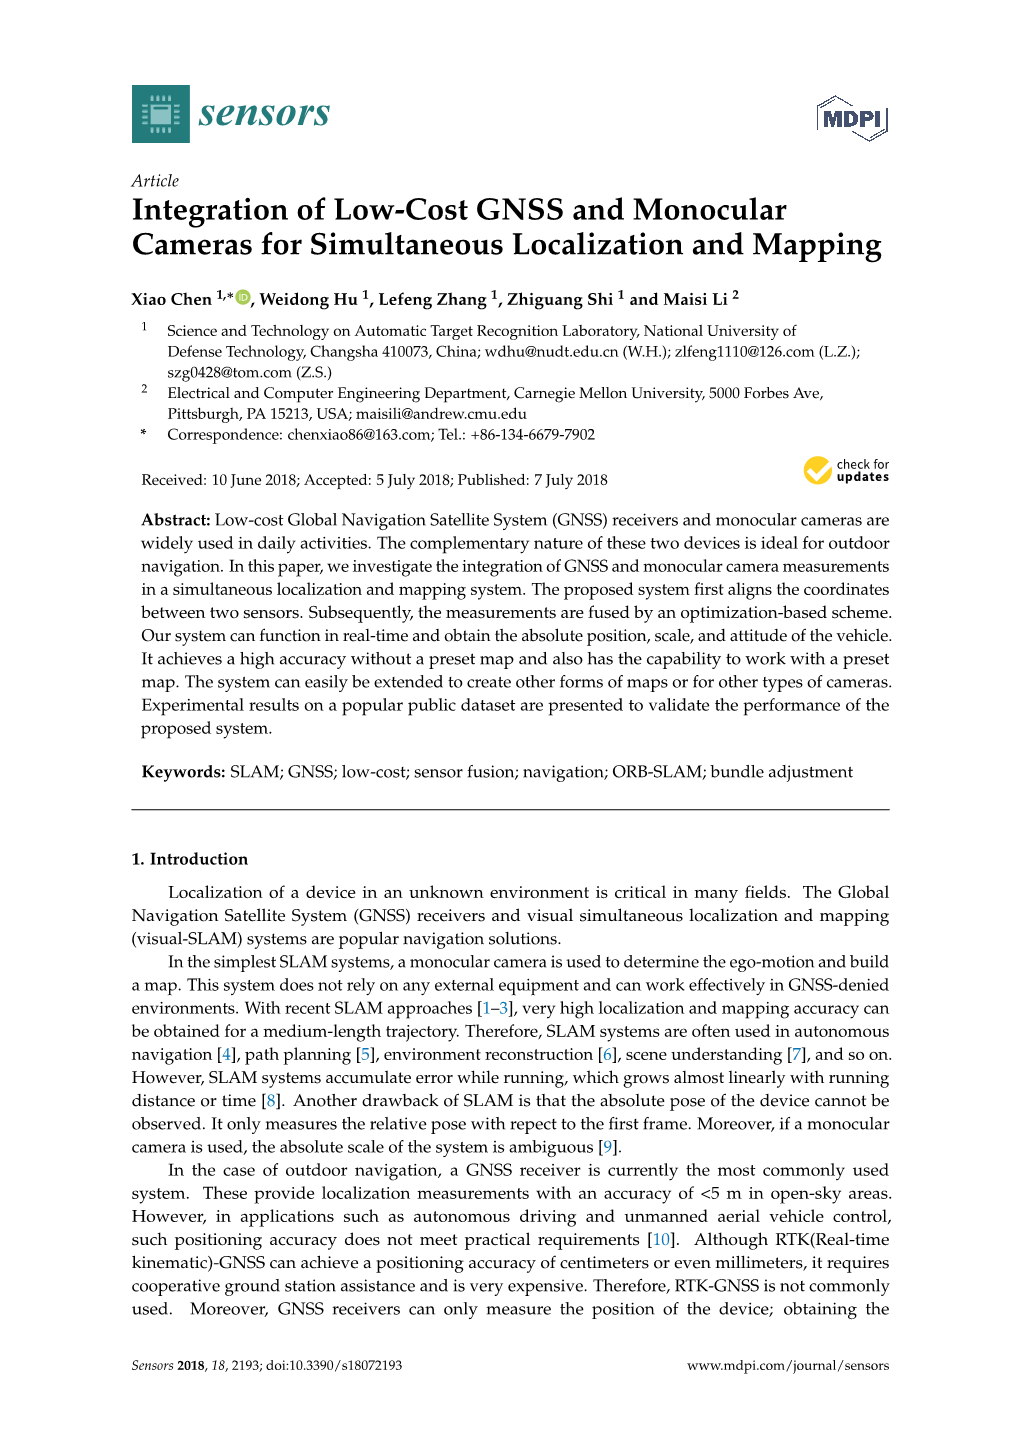 Integration of Low-Cost GNSS and Monocular Cameras for Simultaneous Localization and Mapping